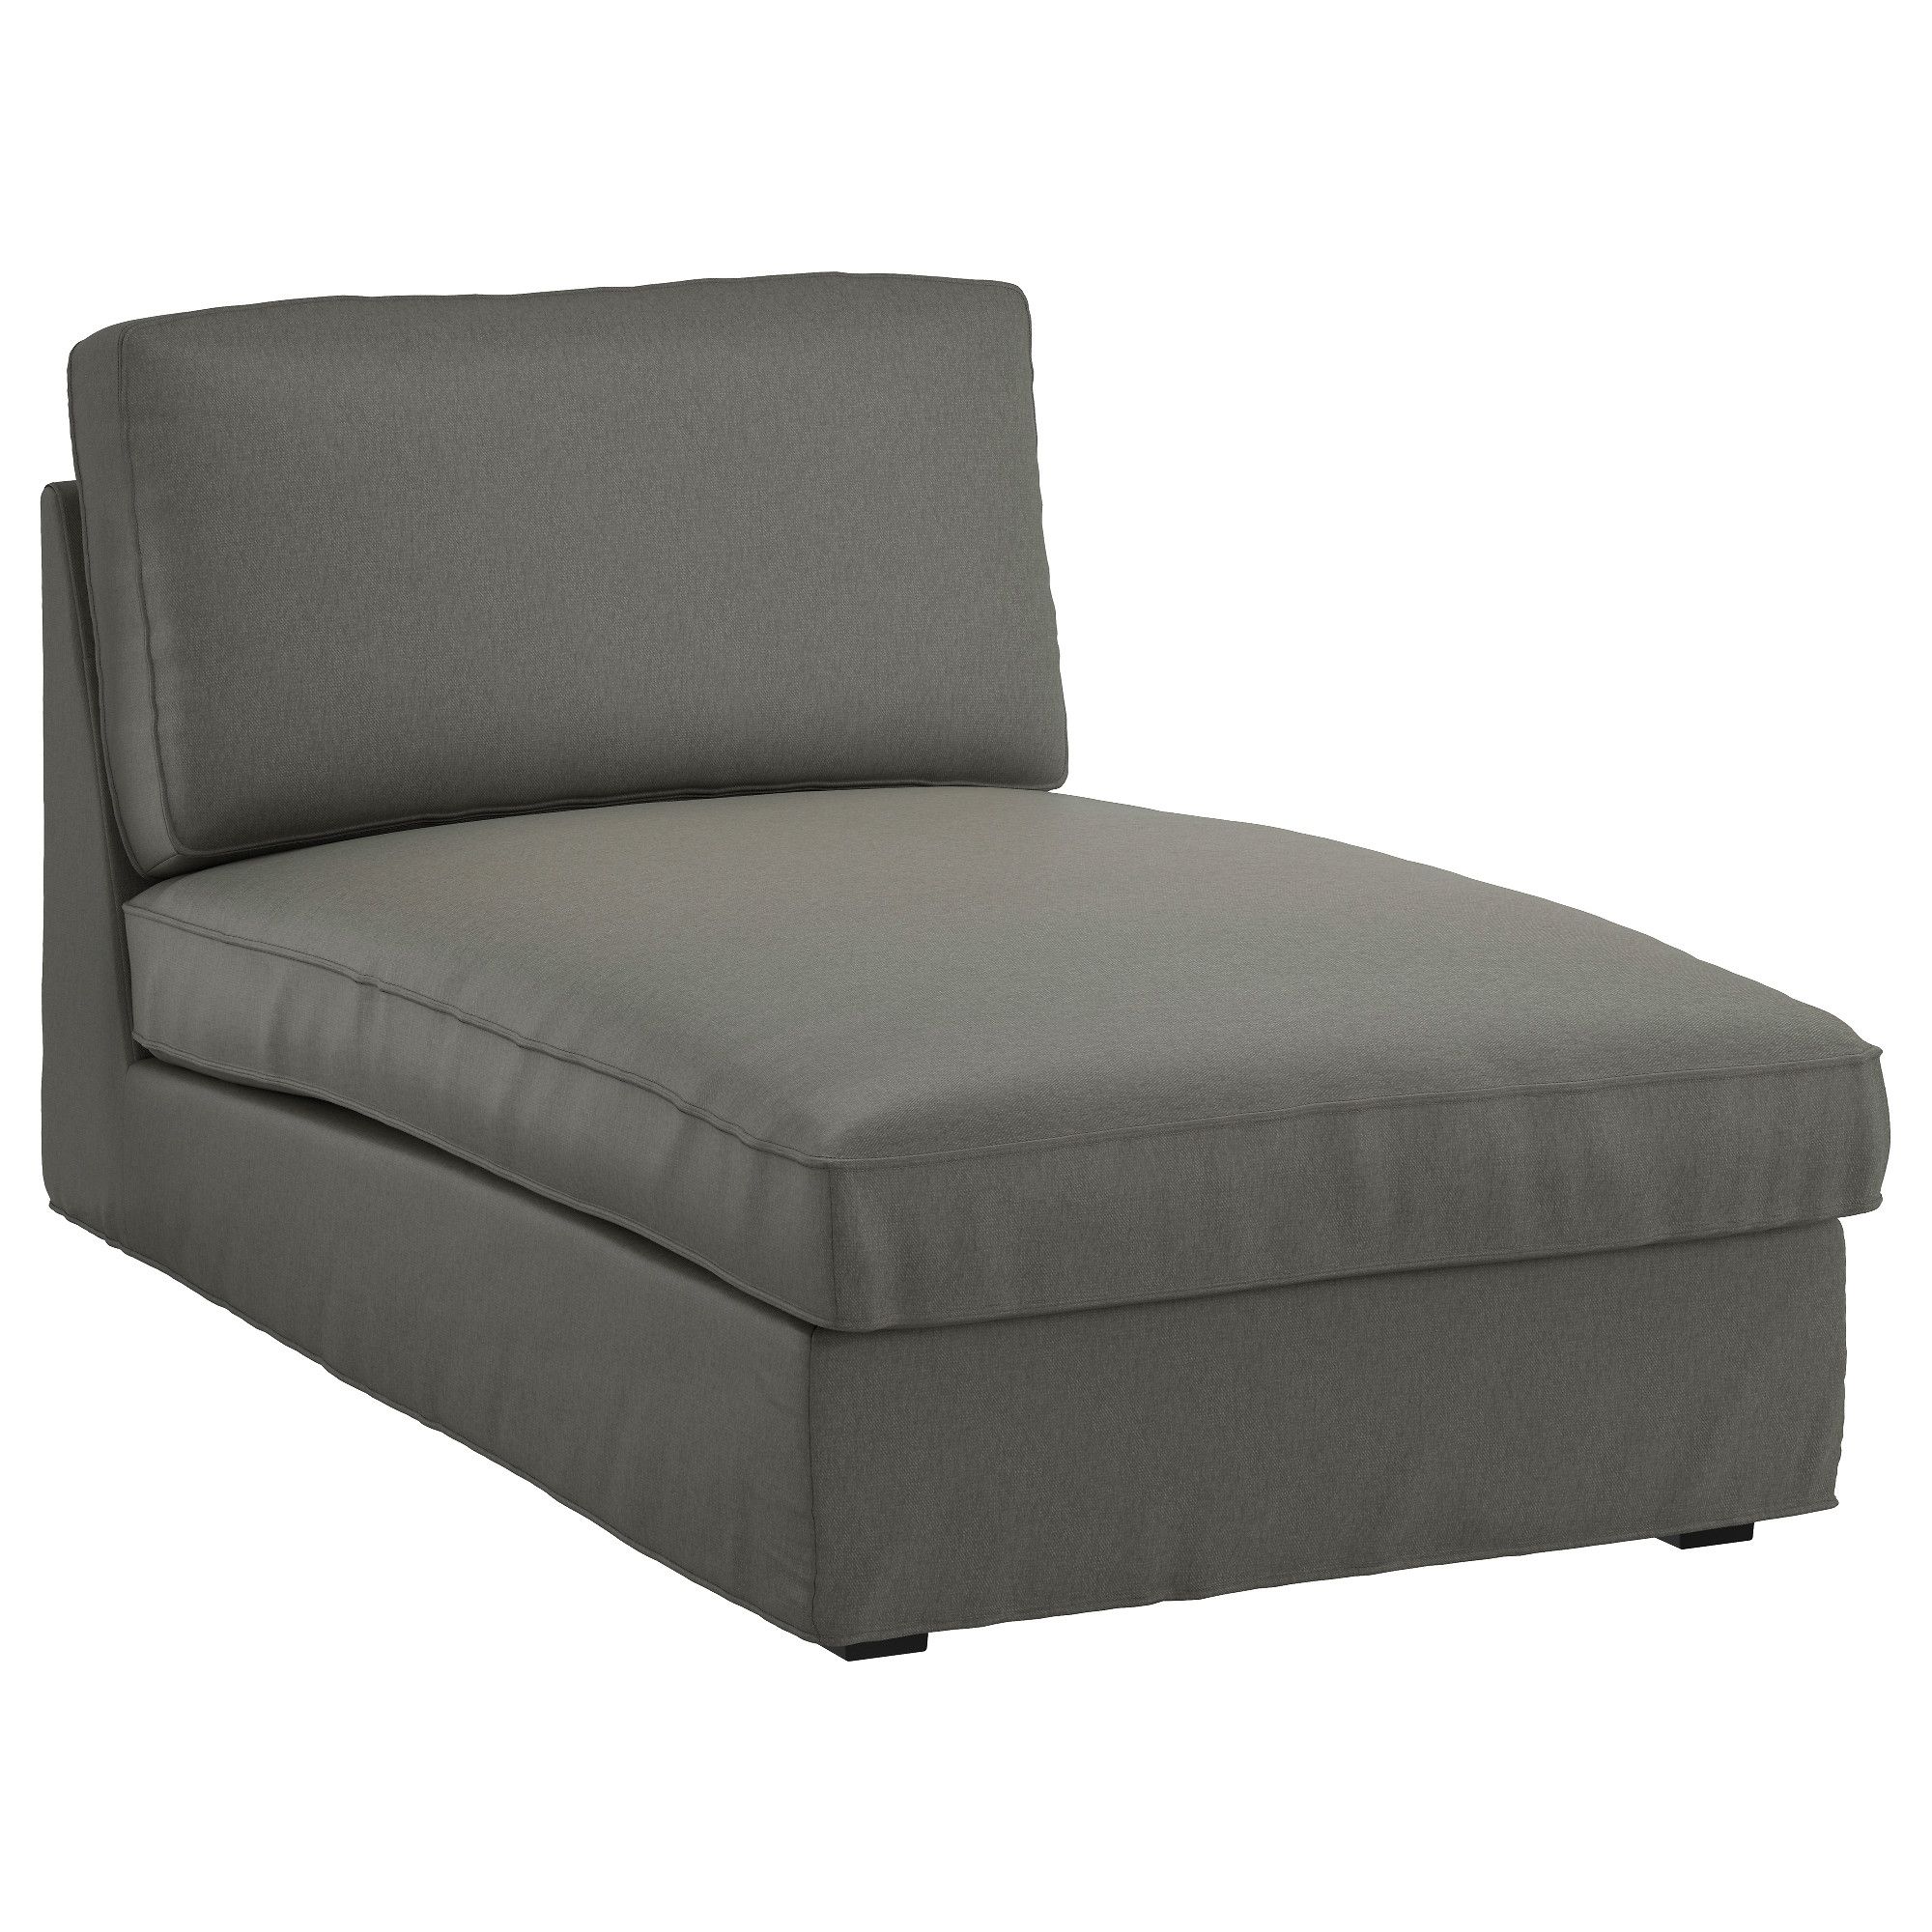 Most Current Kivik Chaise Longue Borred Grey Green – Ikea Throughout Ikea Chaise Sofas (View 8 of 15)